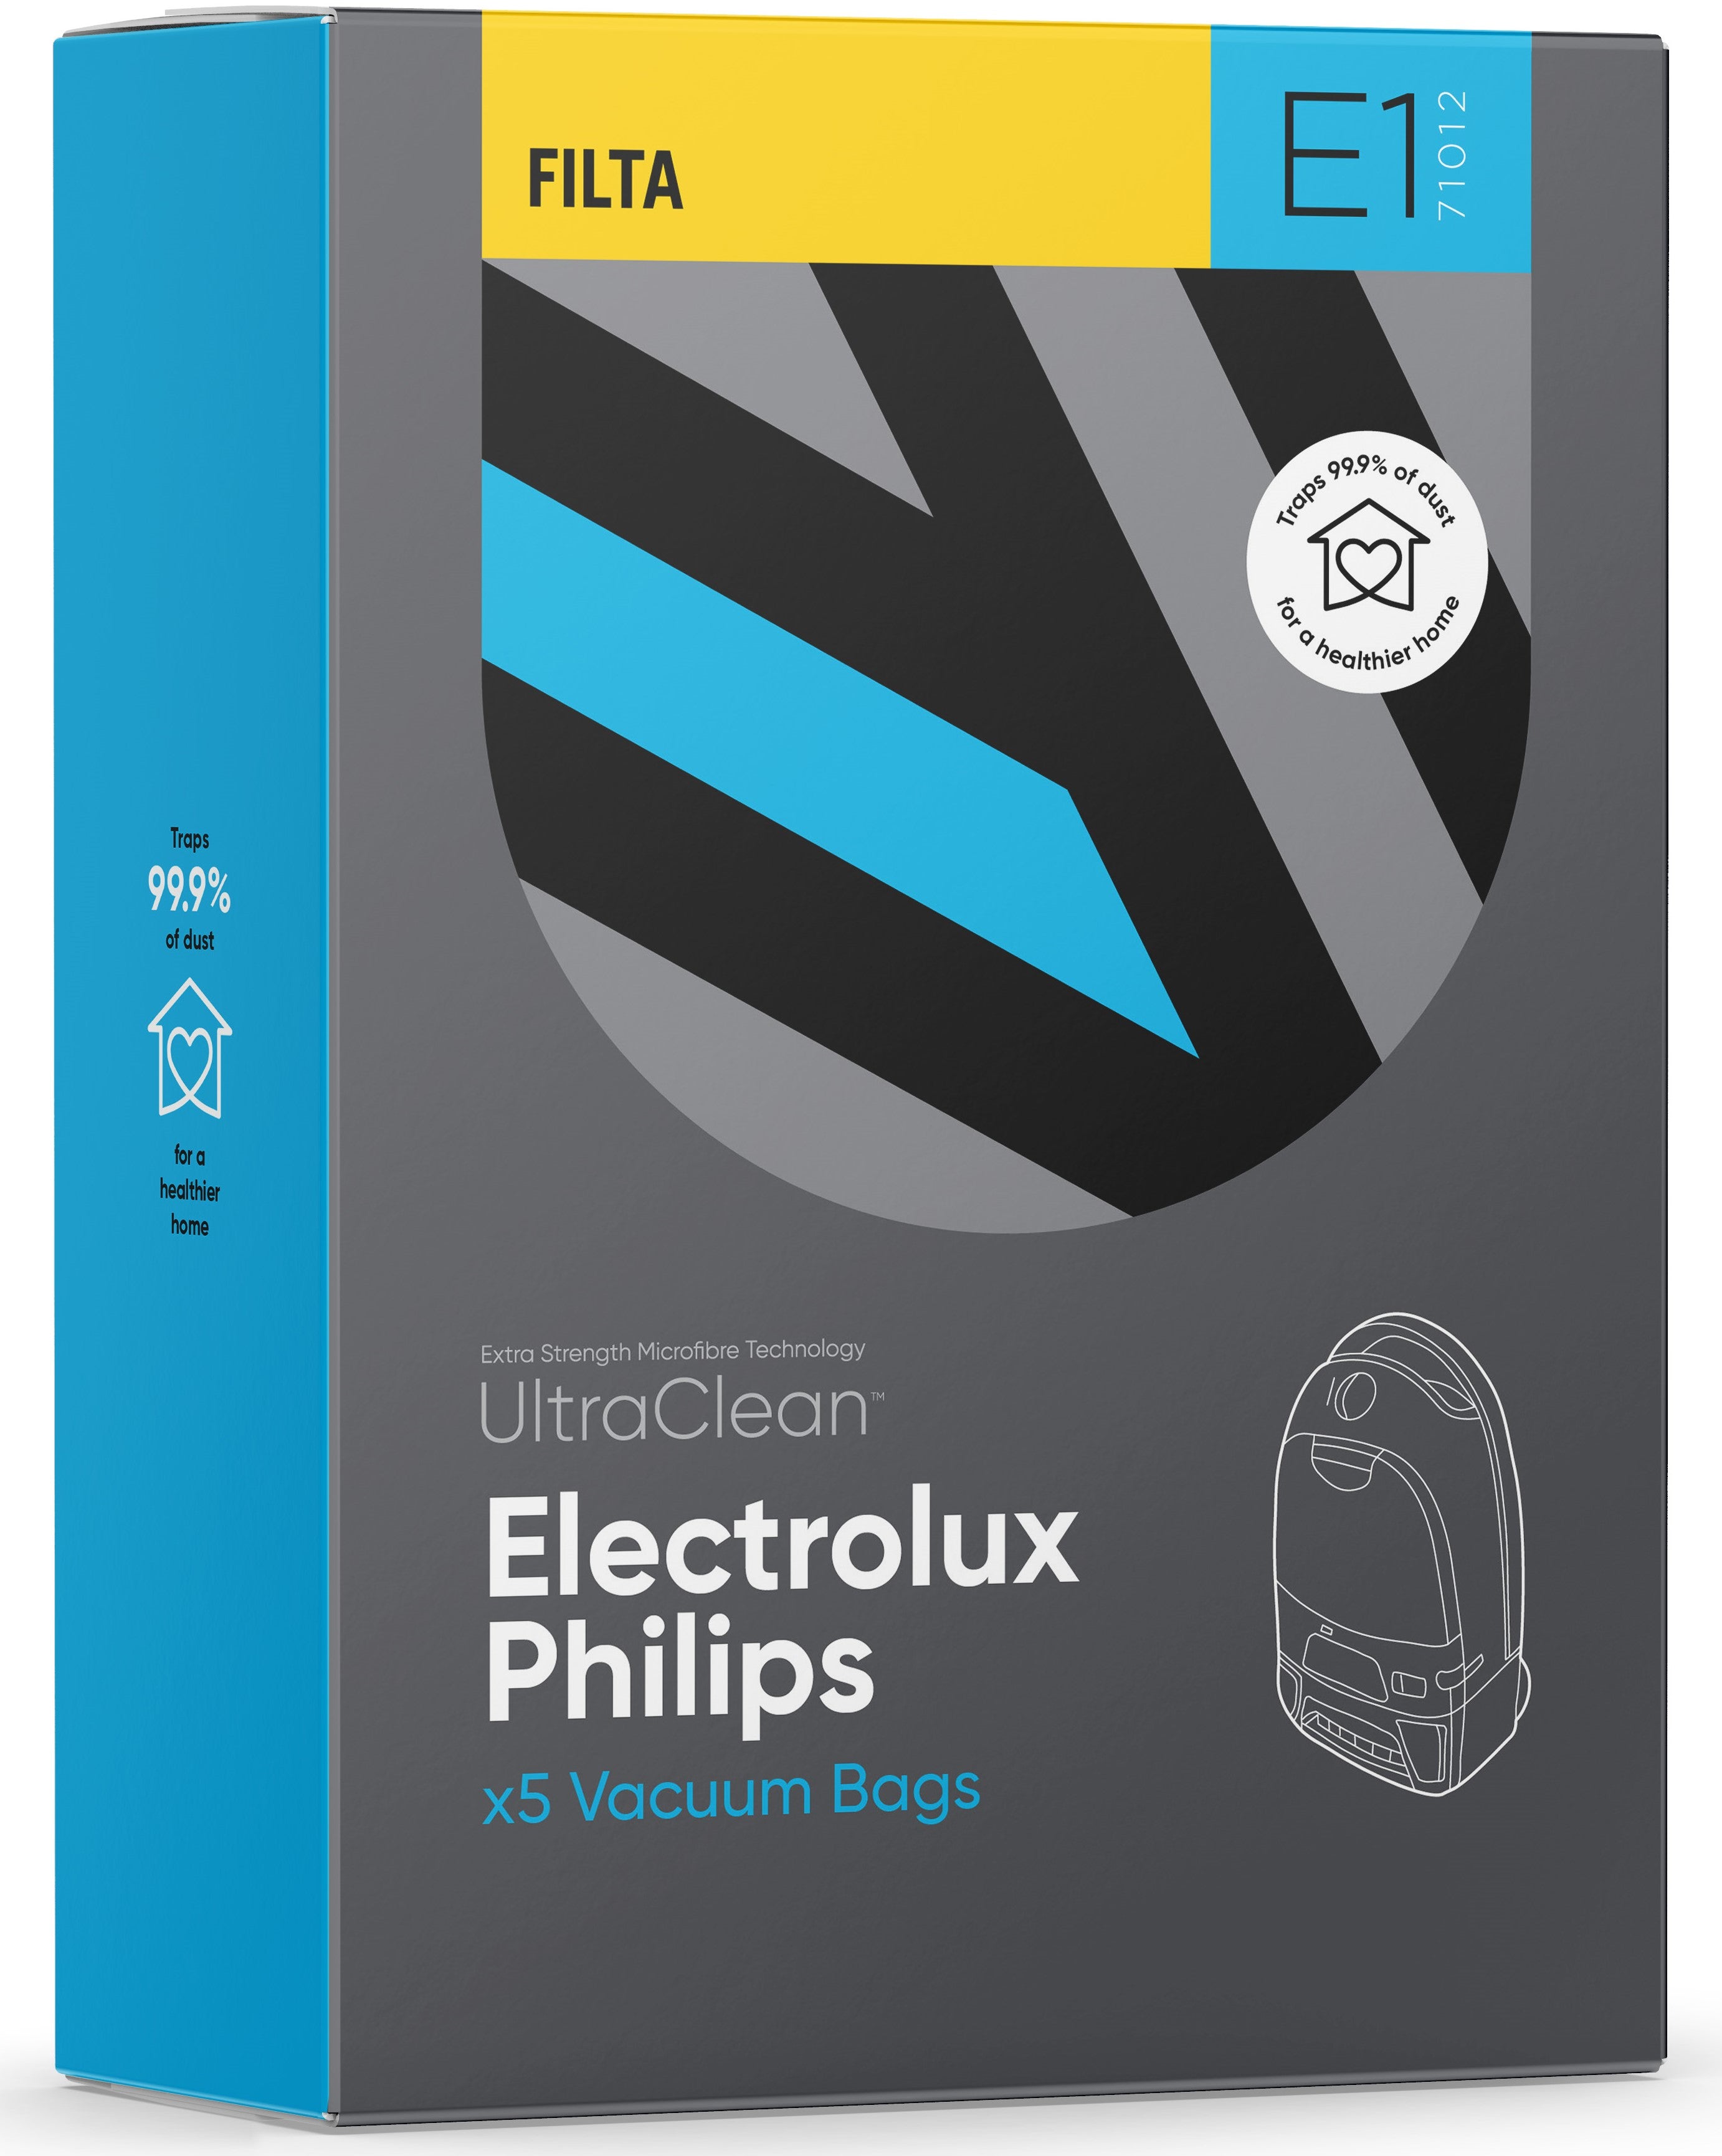 E1 - ULTRACLEAN ELECTROLUX, PHILIPS SMS MULTI LAYERED VACUUM BAGS 5 PA ...